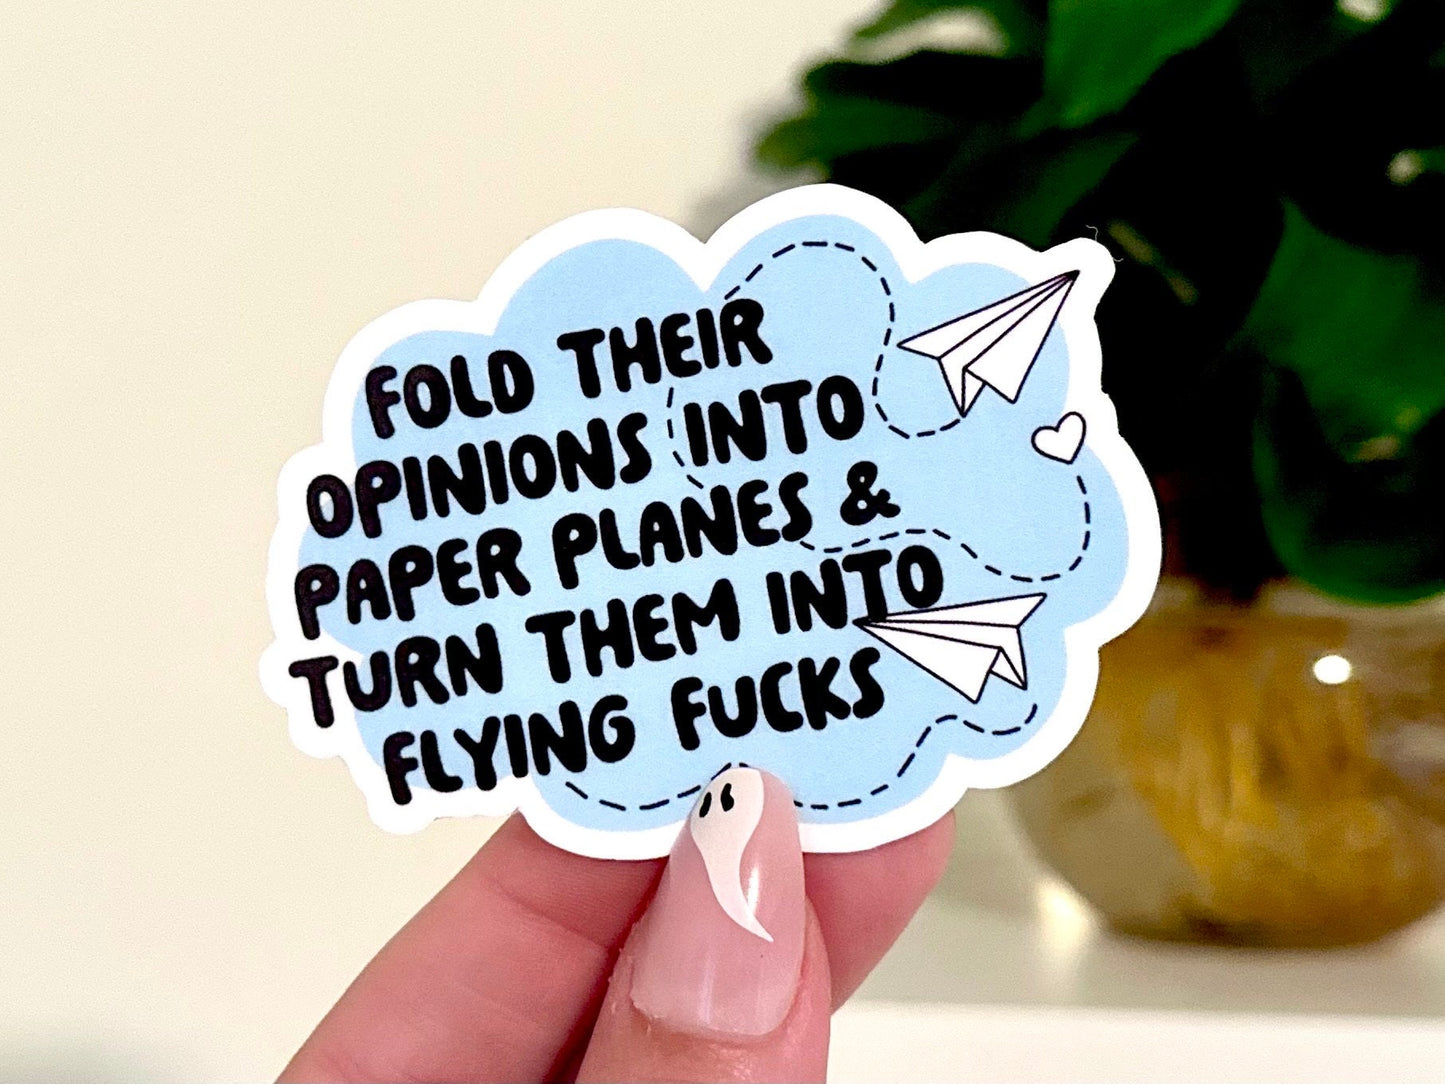 Fold Their Opinions Into Paper Planes & Turn Them Into Flying F*cks Waterproof Sticker, Mental Health Stickers, Funny Bestfriend Gifts